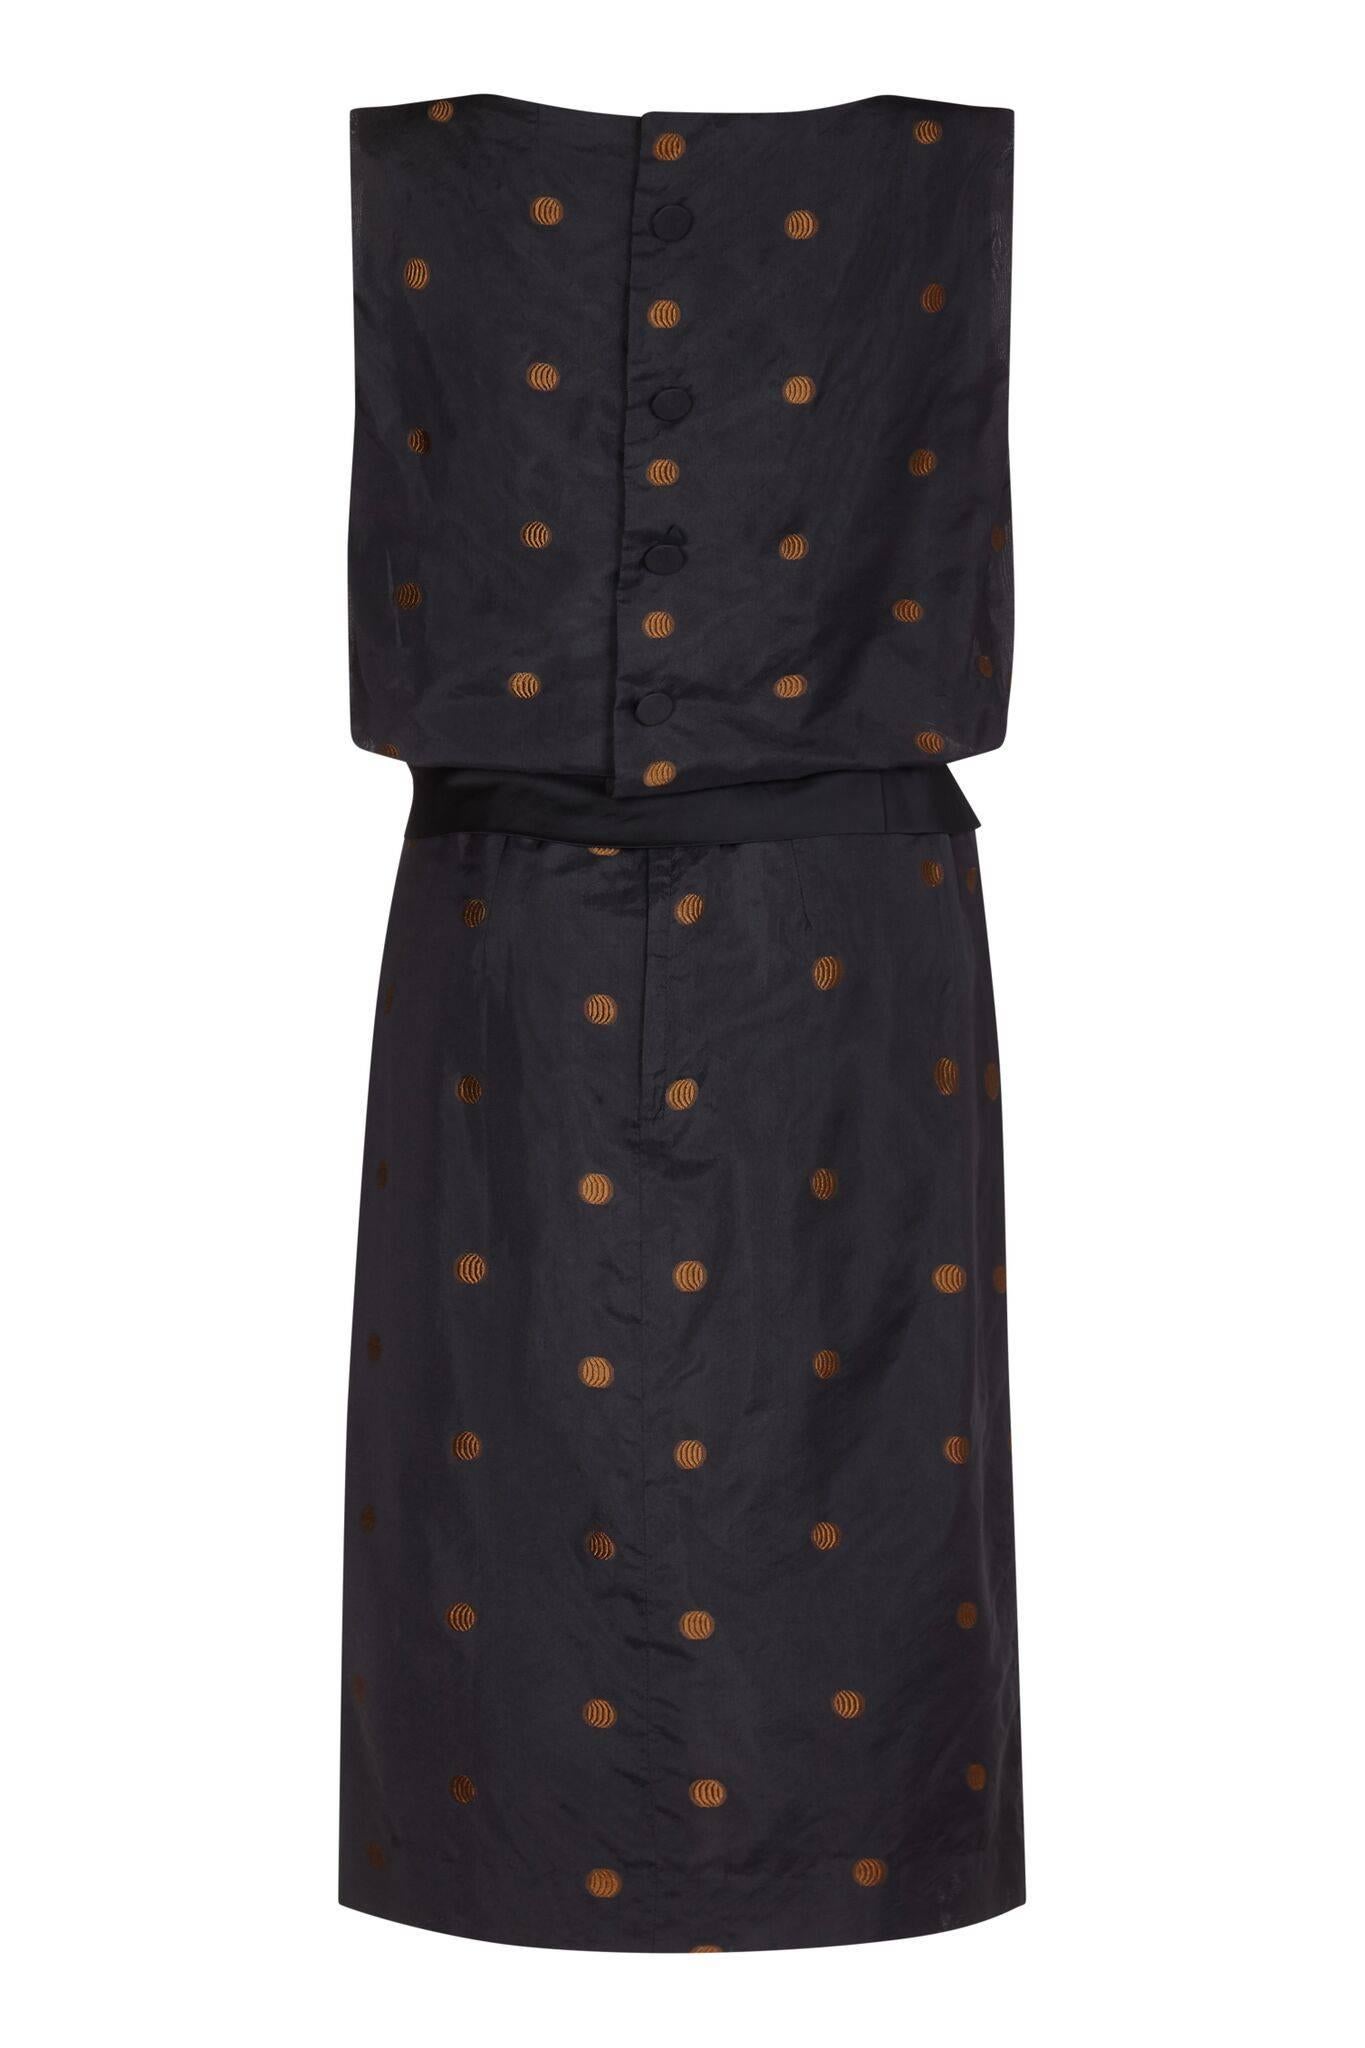 This stylish vintage 1950s Kitty Copeland black silk taffeta dress with polkadot detail and peplum sash boasts timeless city chic and unusual design features. The taffeta overlay has a playful machine embroidered bronze polkadot motif to contrast